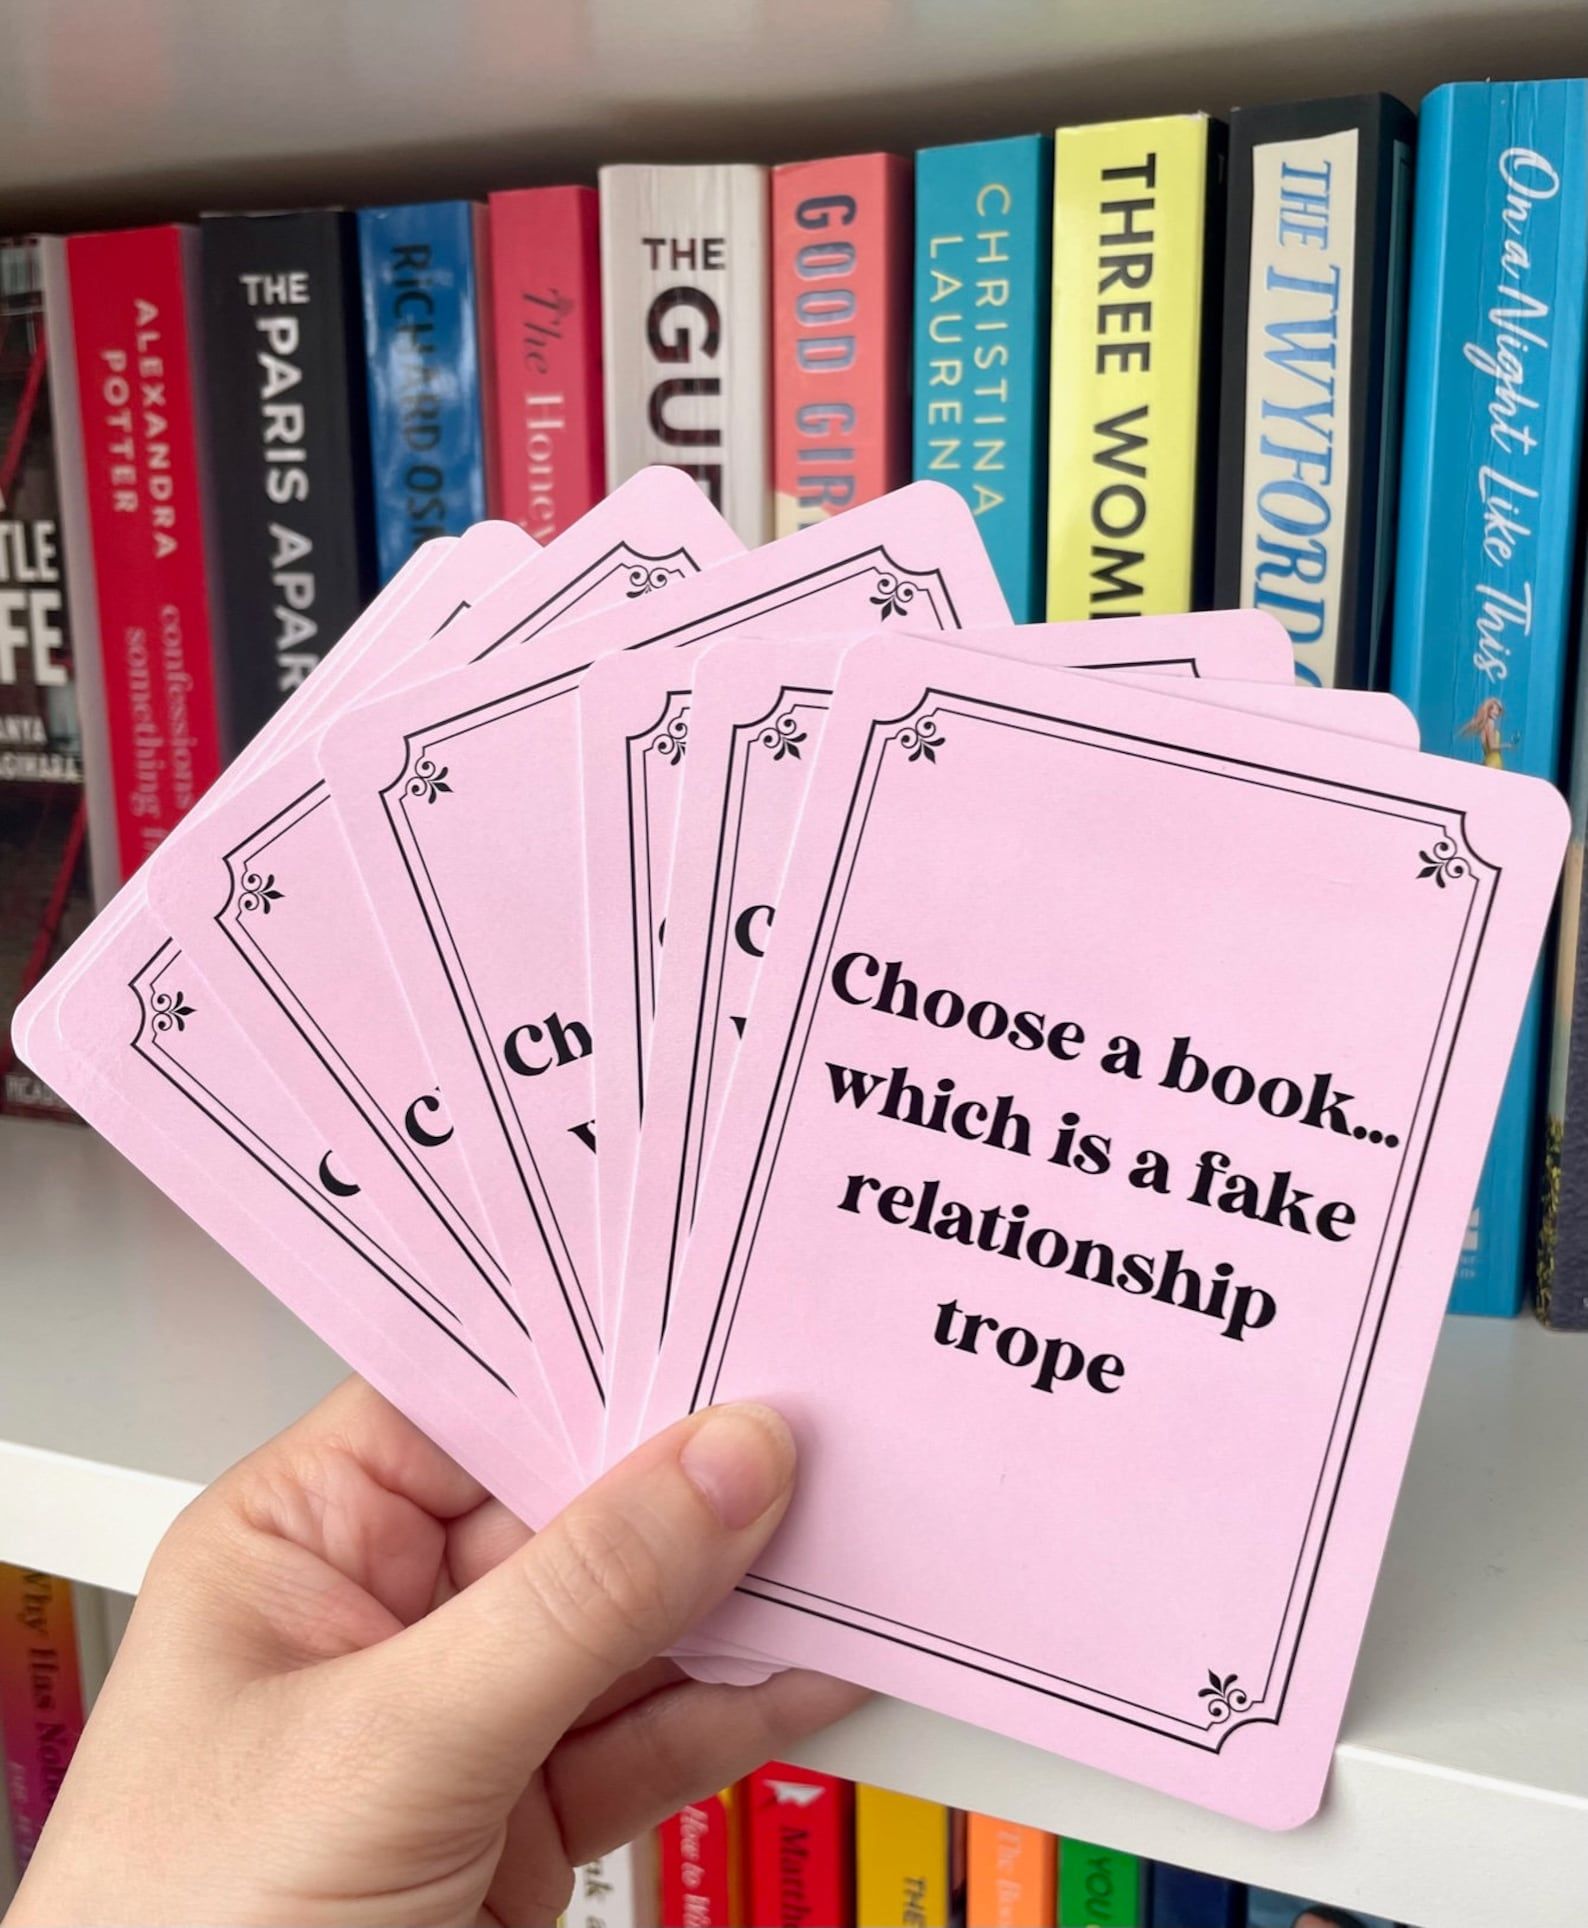 A set of pink cards with black writing that suggests types of books and tropes to try